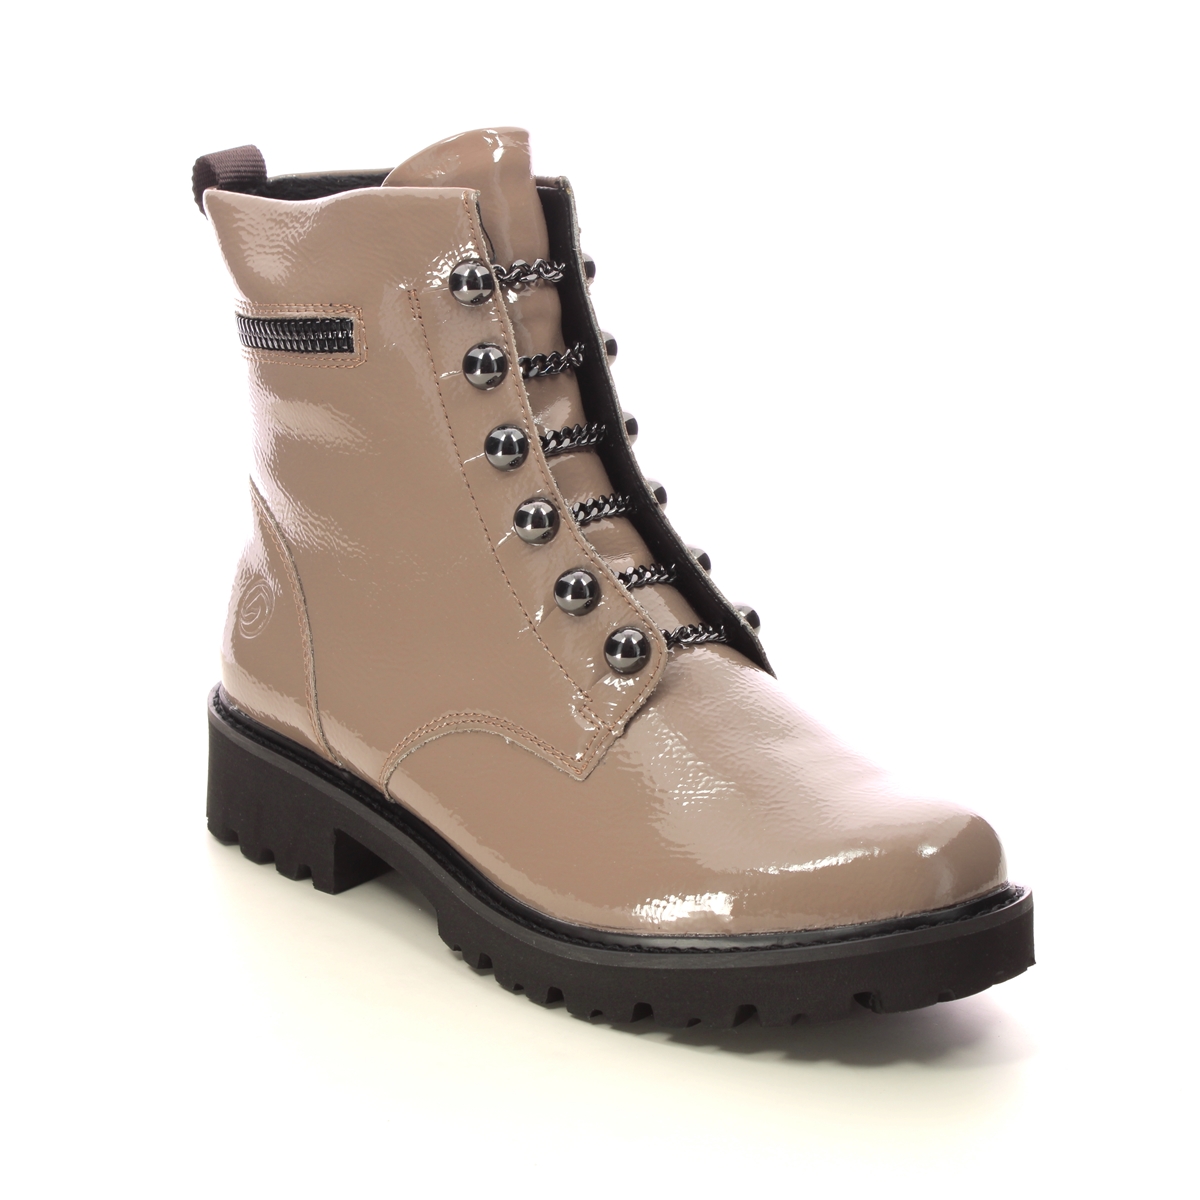 Remonte Docland Taupe Patent Womens Biker Boots D8670-20 In Size 41 In Plain Taupe Patent